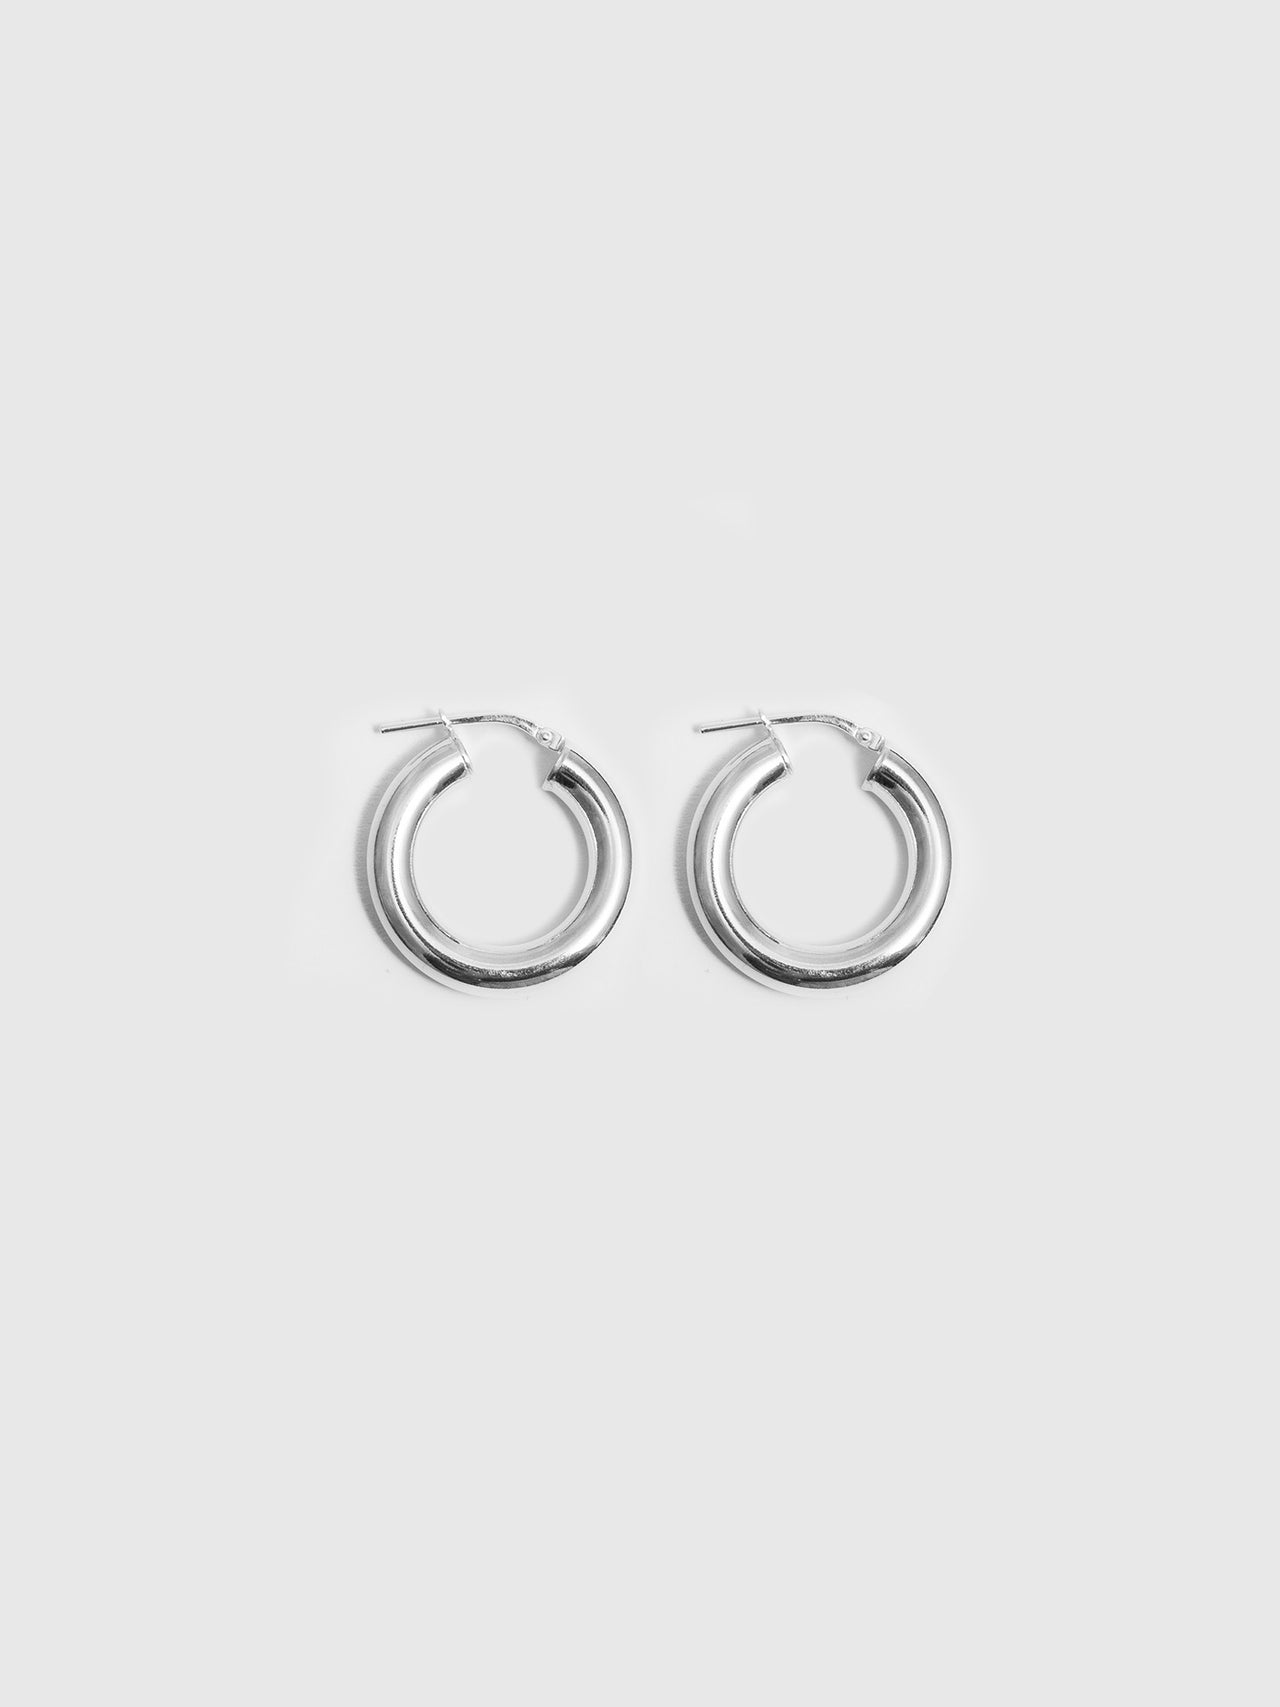 Product shot of thick sterling silver tru hoops shot on white background.